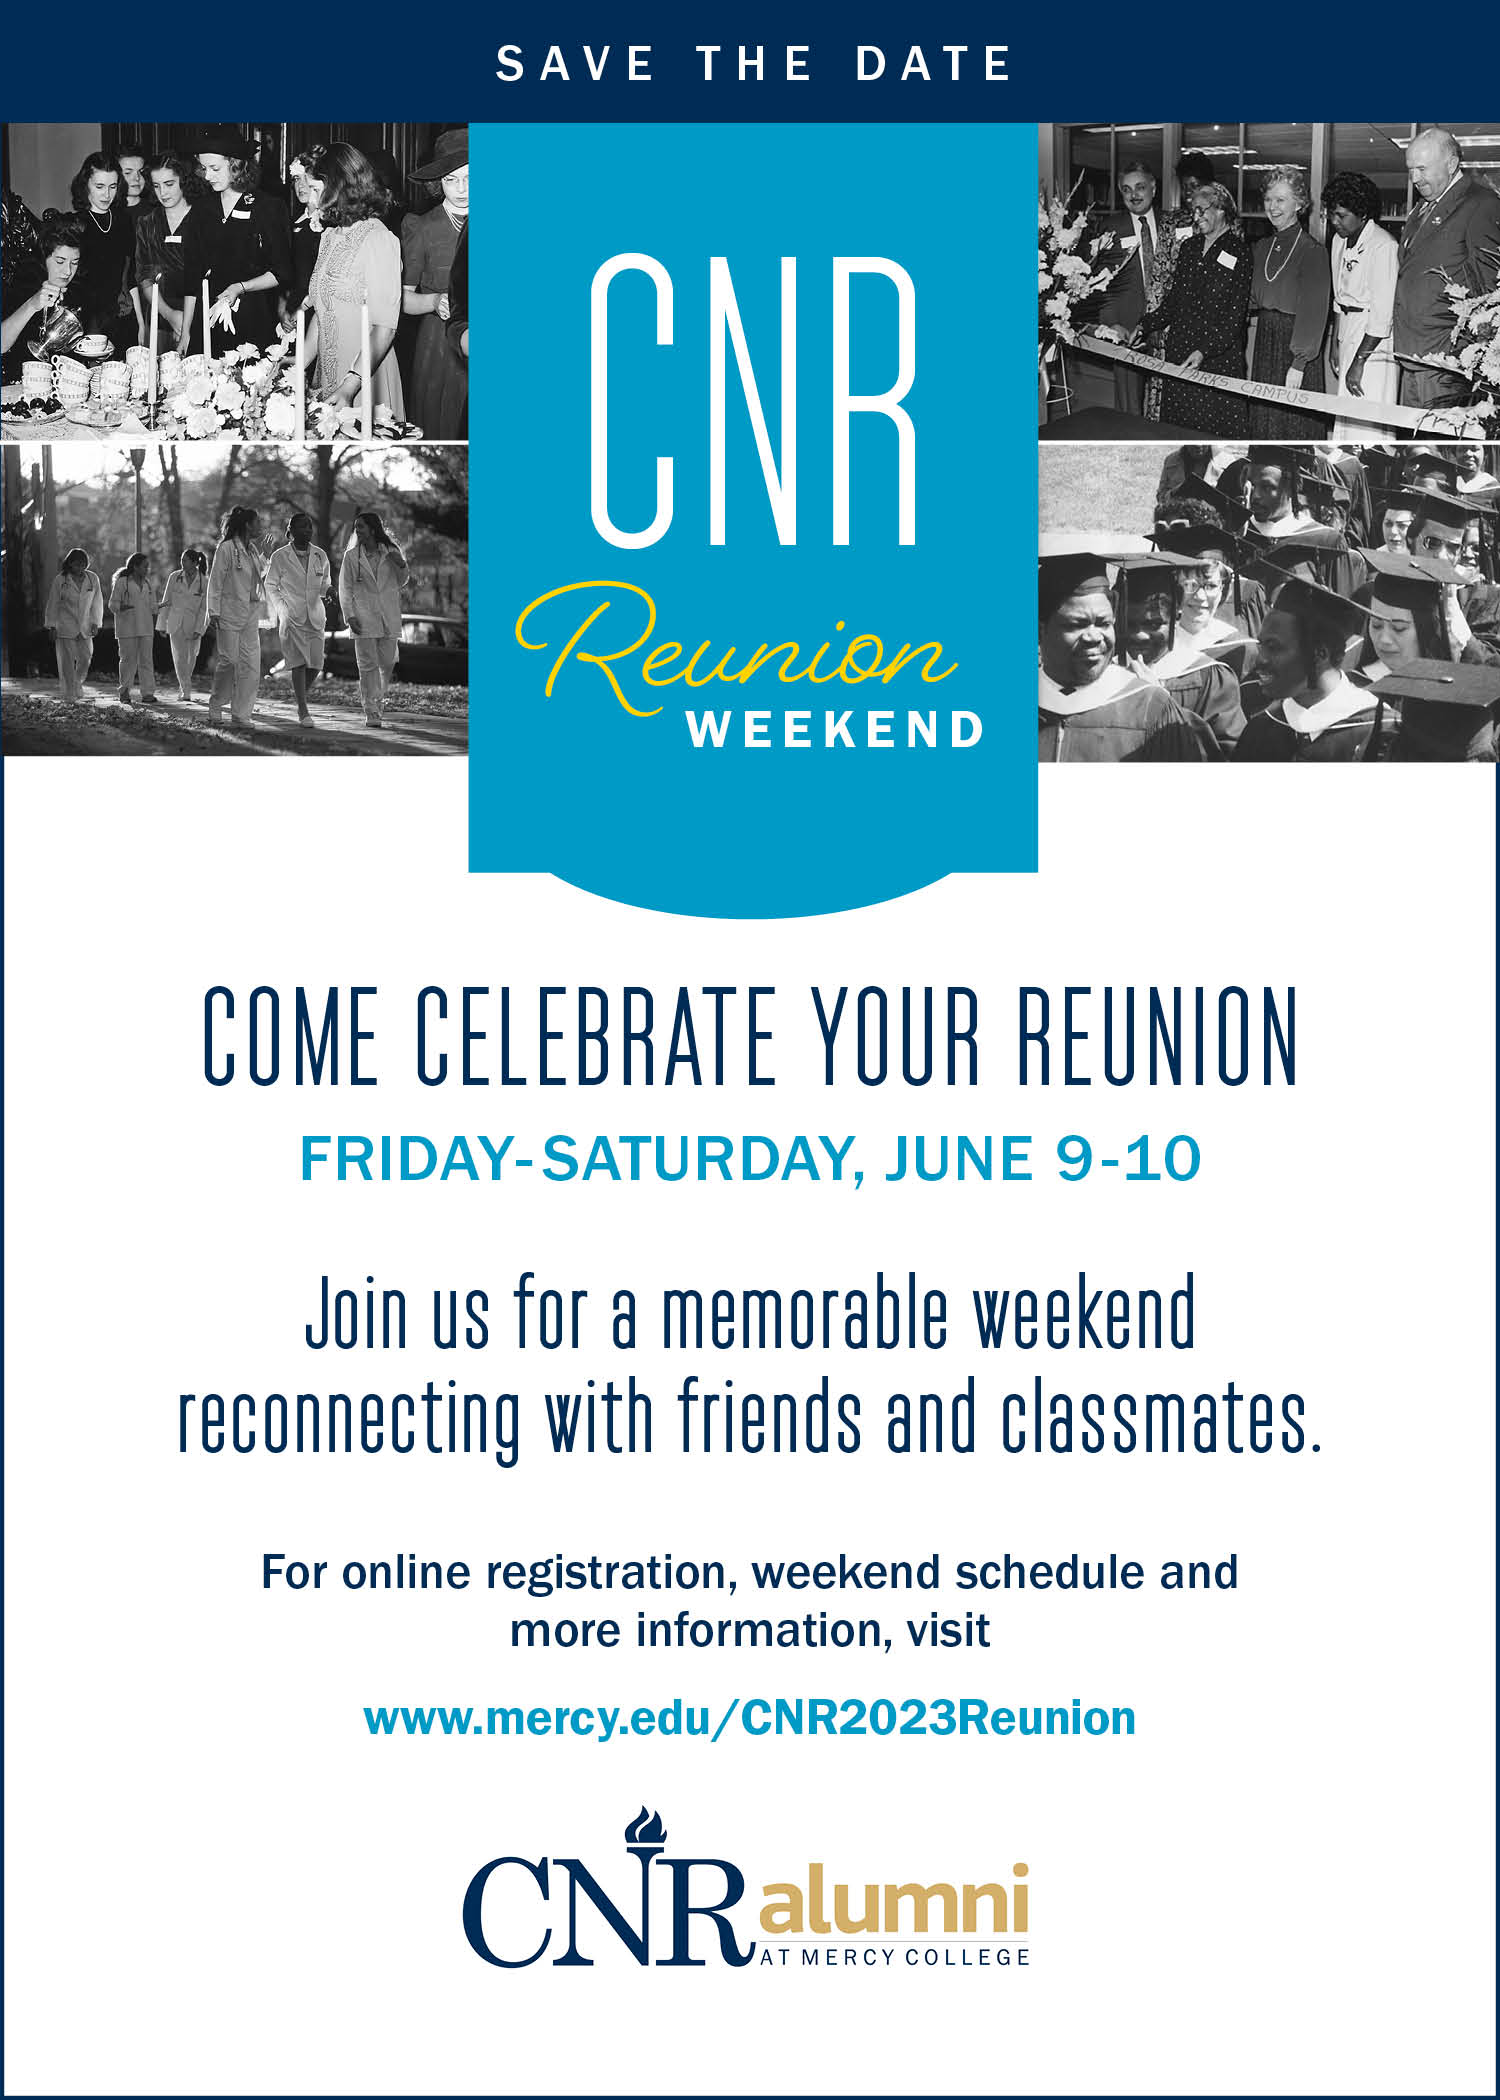 CNR Reunion 2023 Save the Date